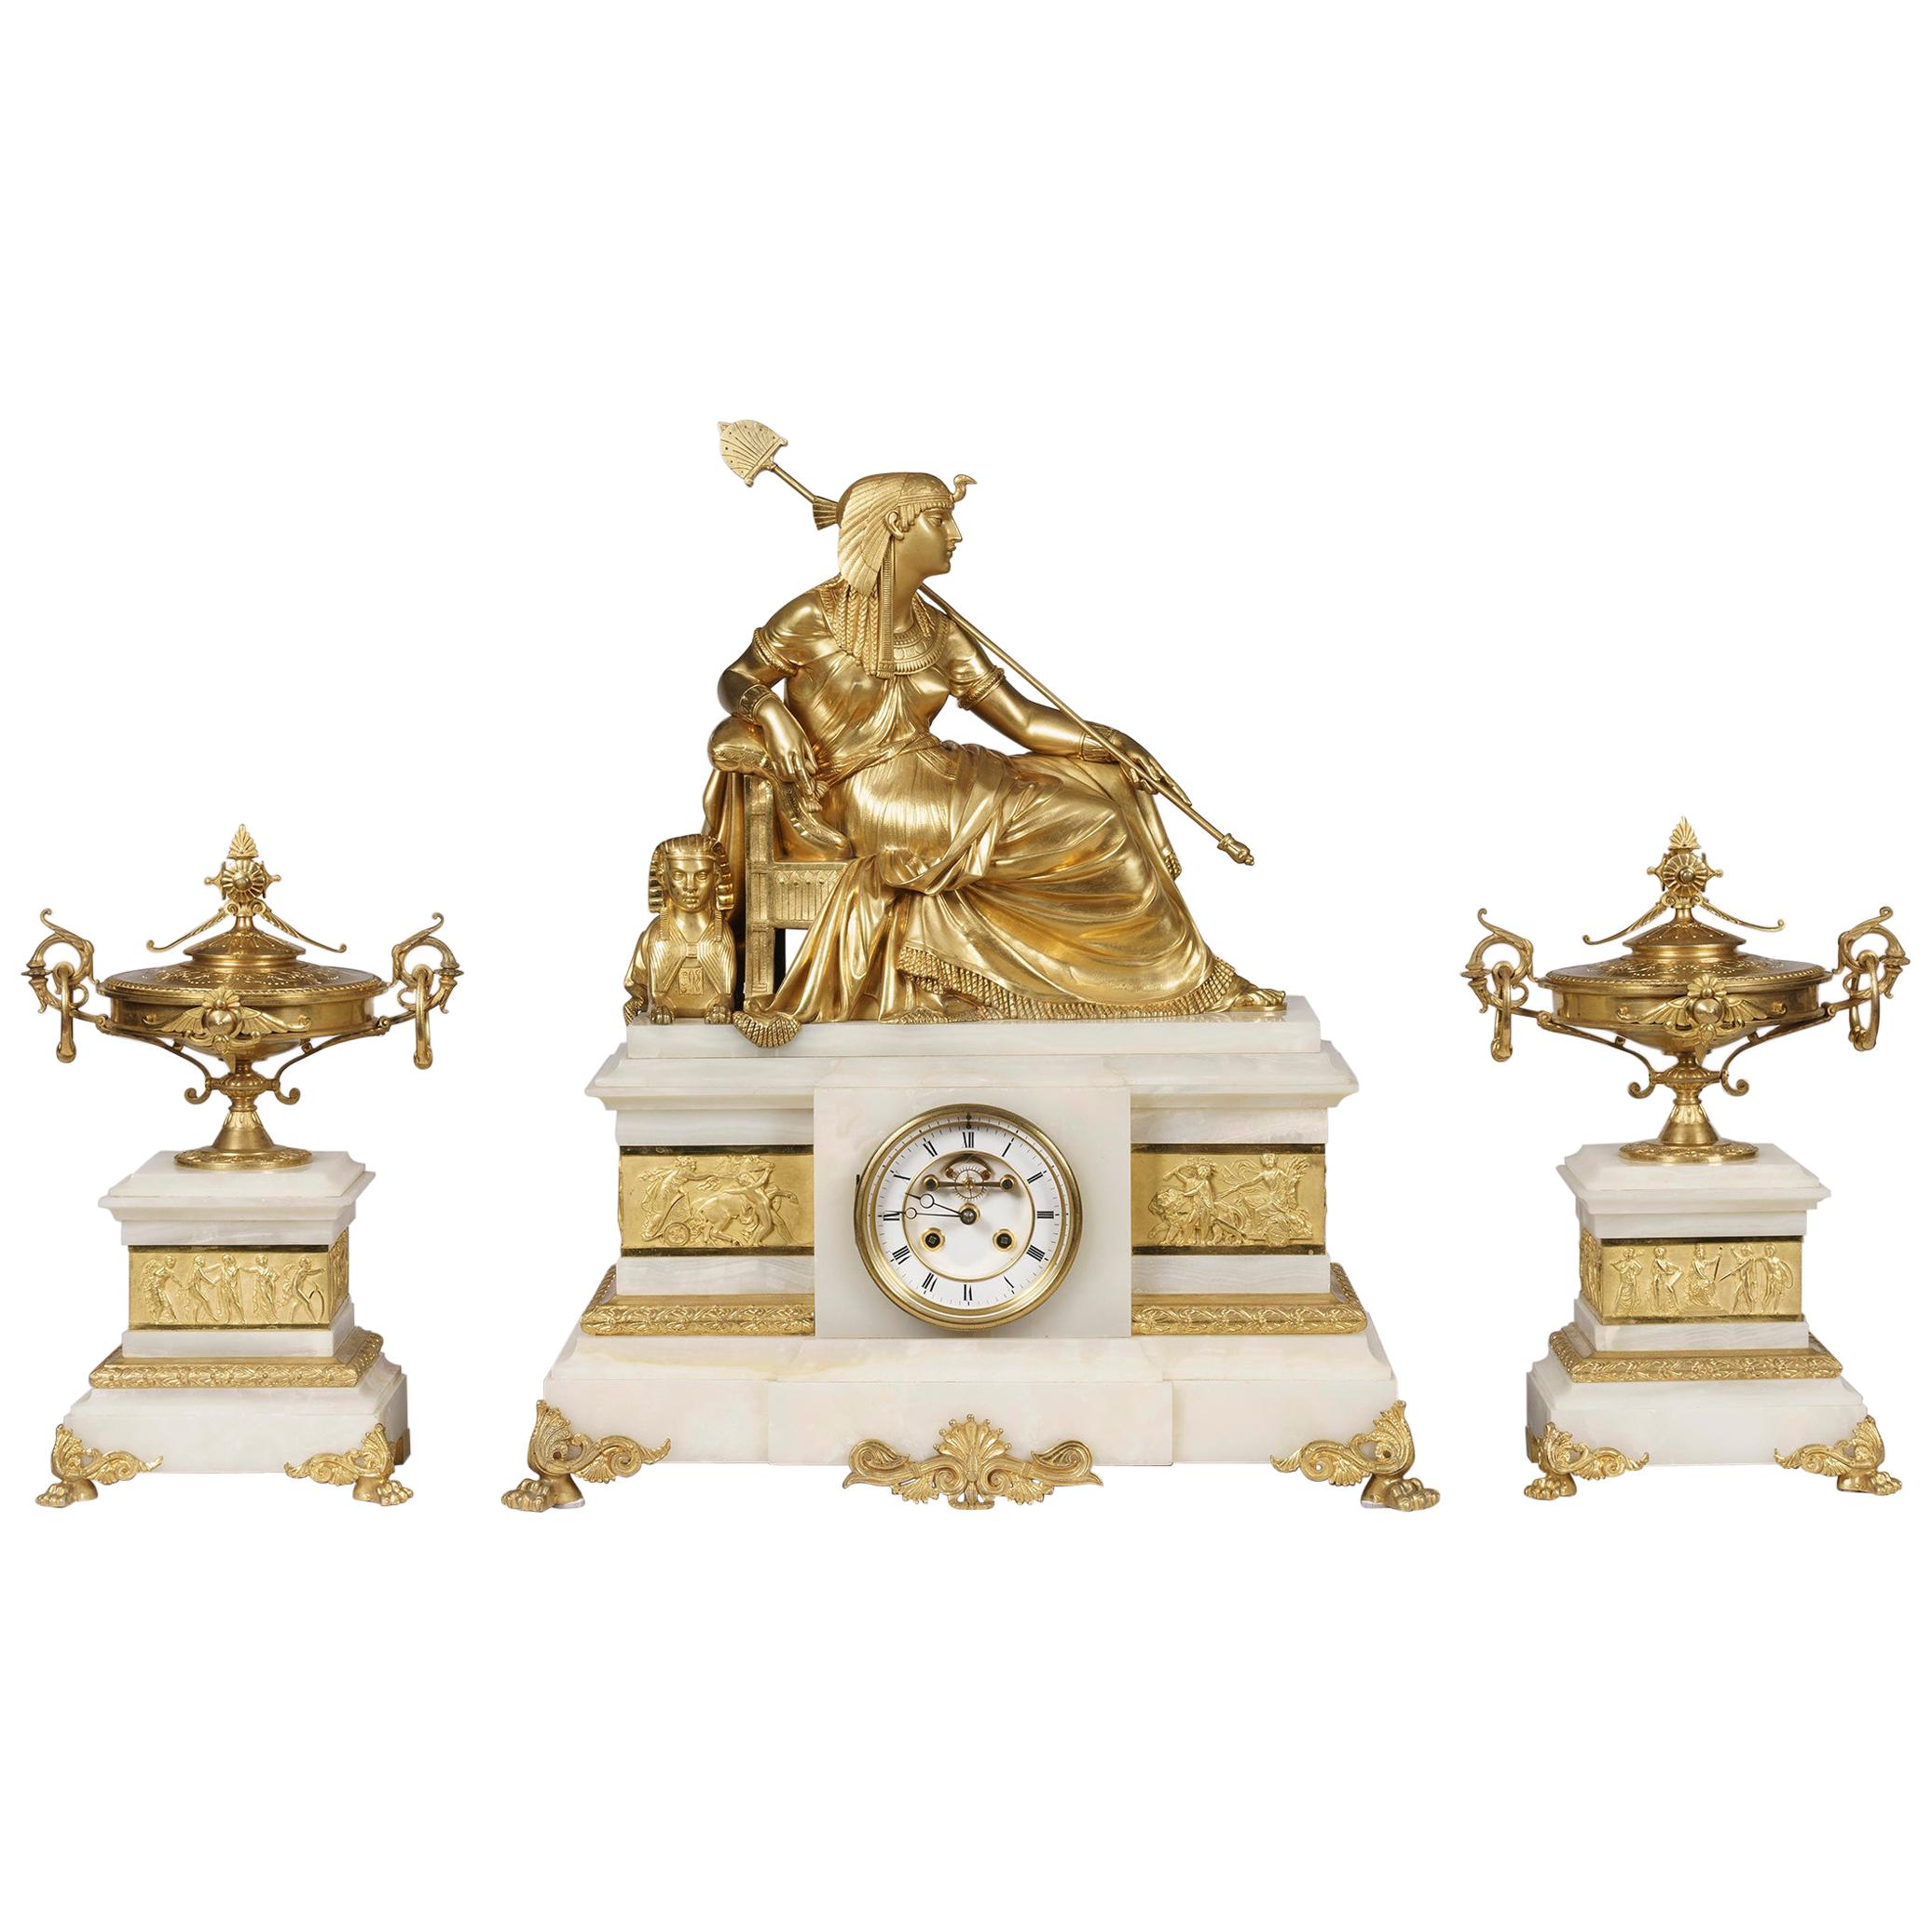 19th Century French Onyx and Ormolu Clock Garniture in the Egyptian Manner For Sale